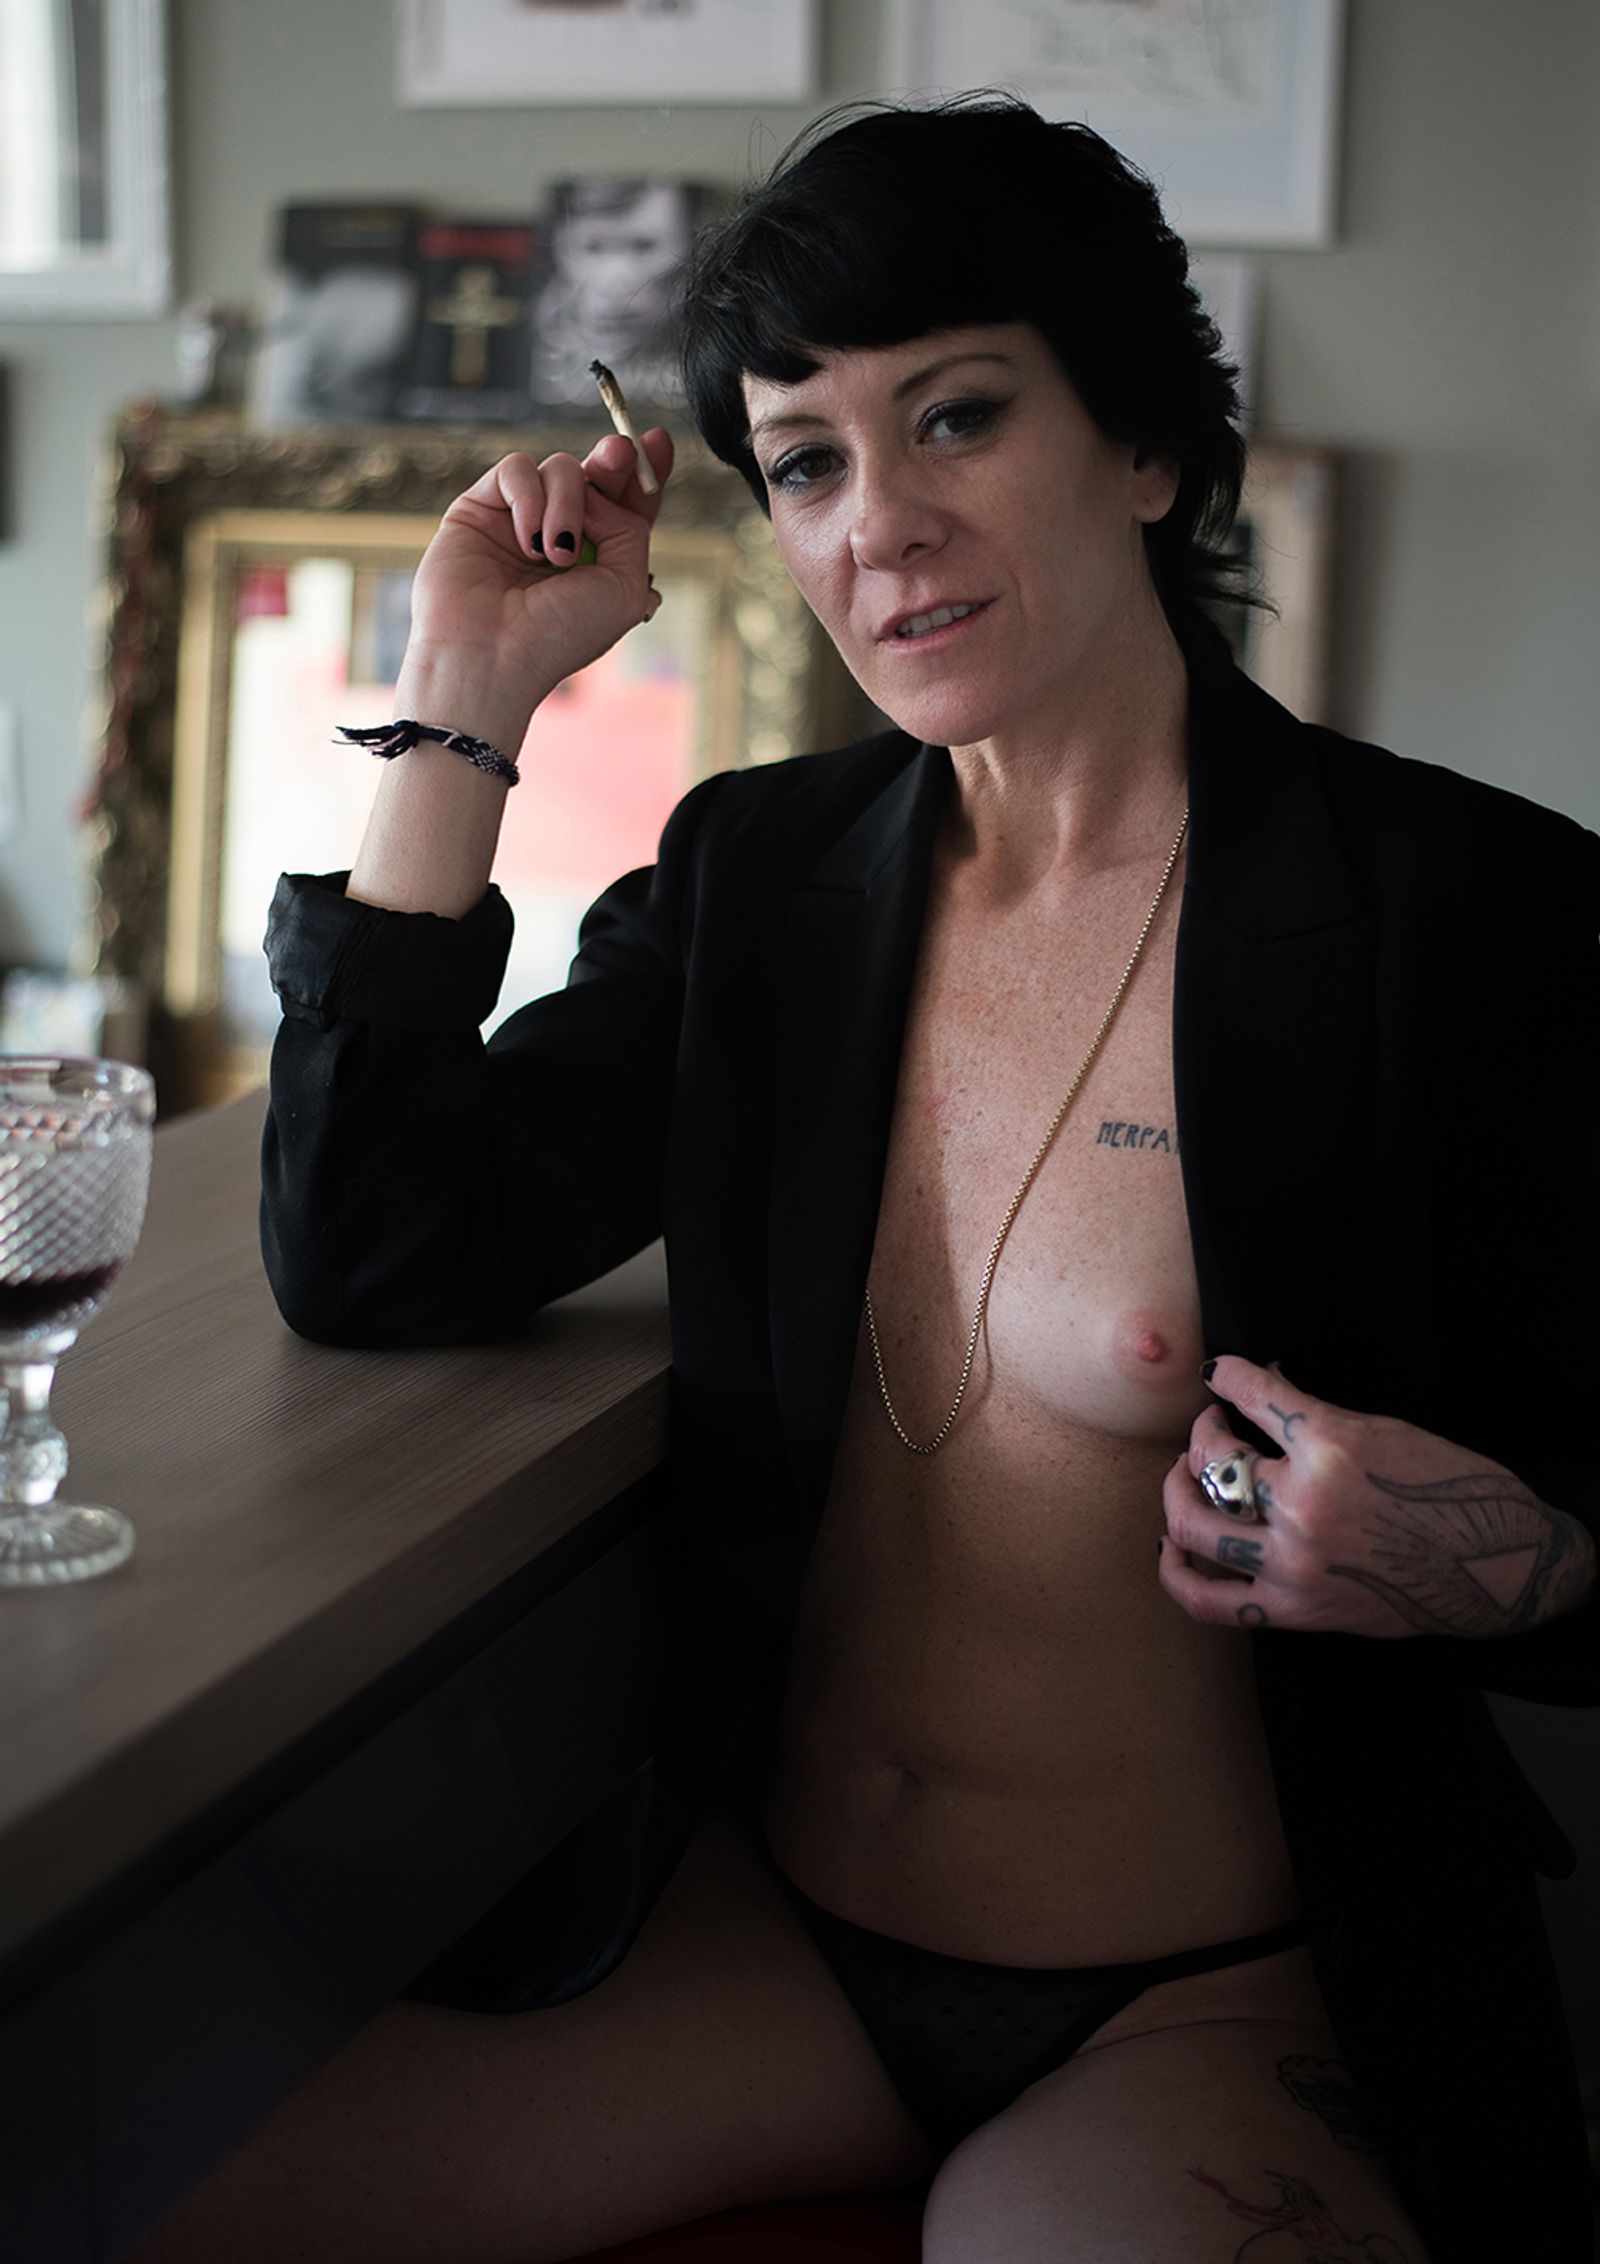 © Camila Falcão - Abhiyana shows a boob while smoking a joint and drinking wine